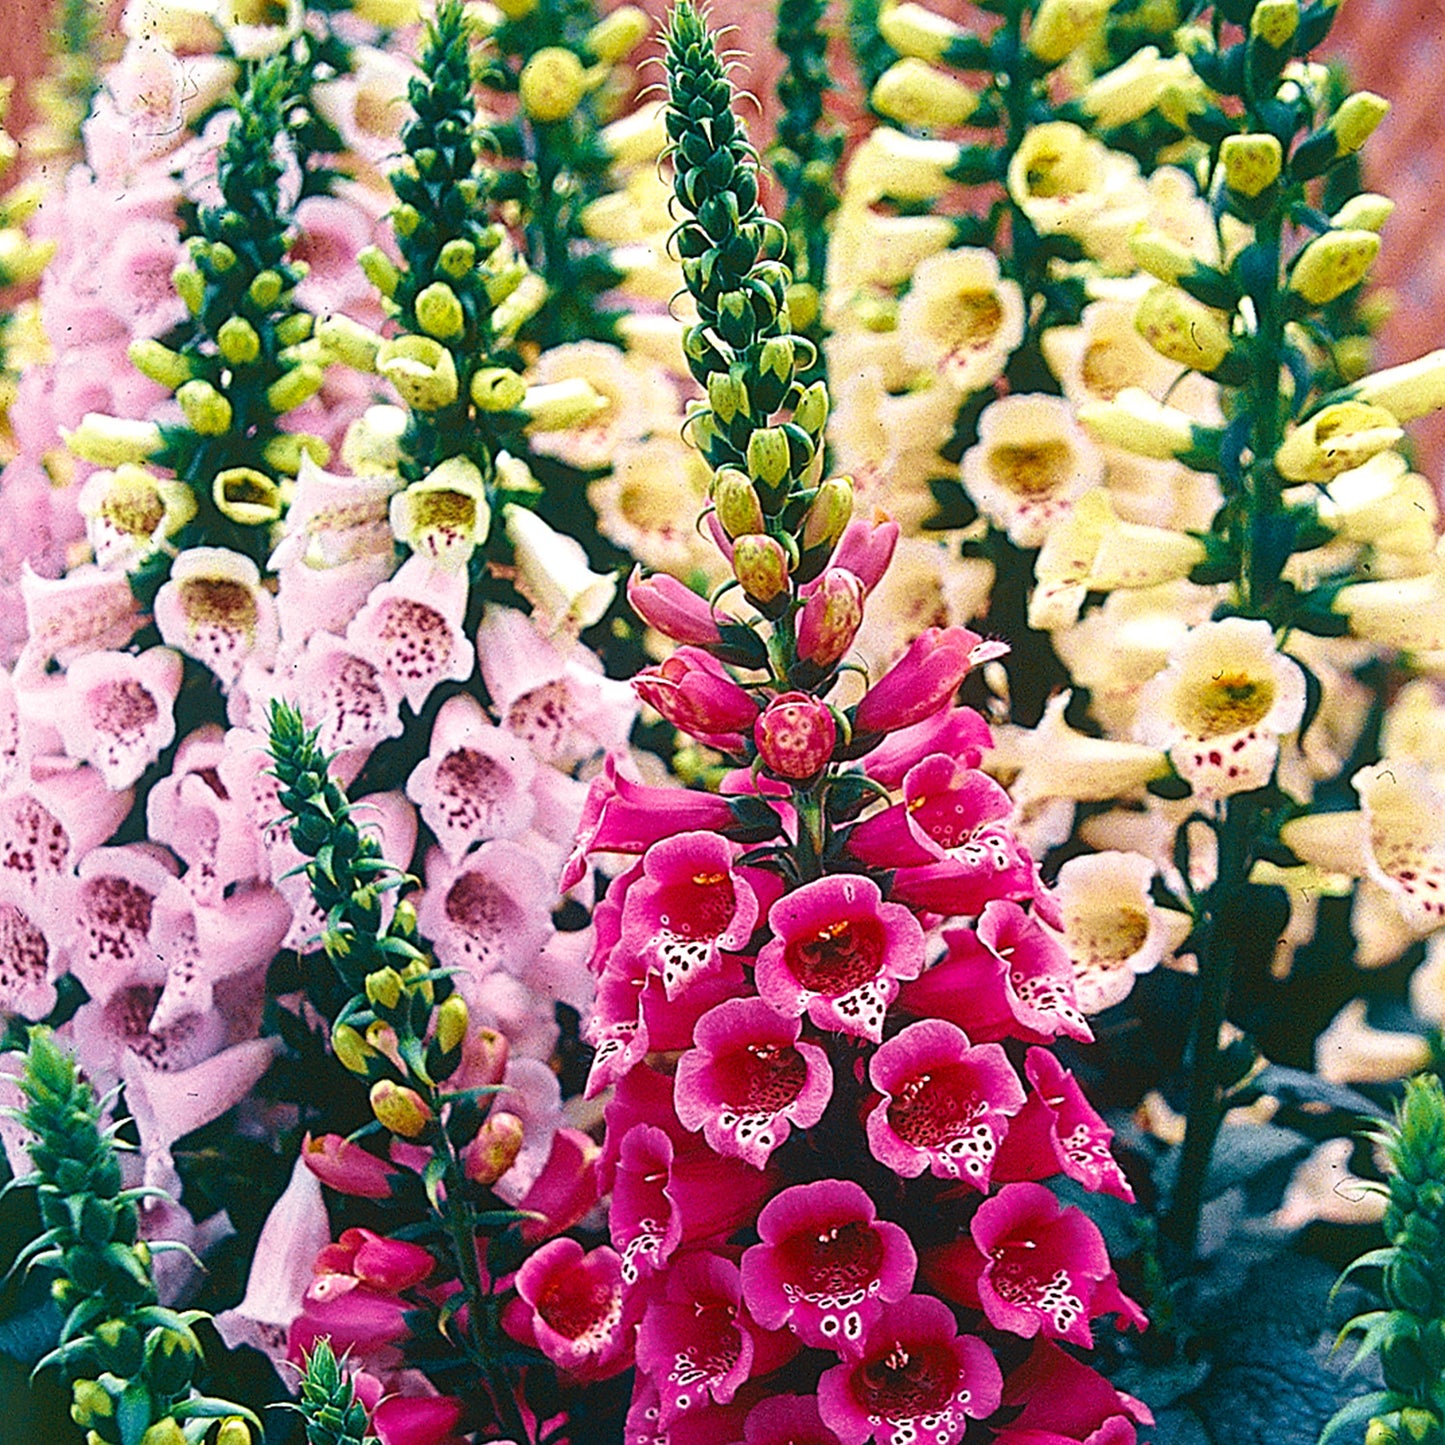 Hybrid Mixed Colors Excelsior Foxglove seeds fully matured and blooming their bell-shaped, pastel colored flowers.